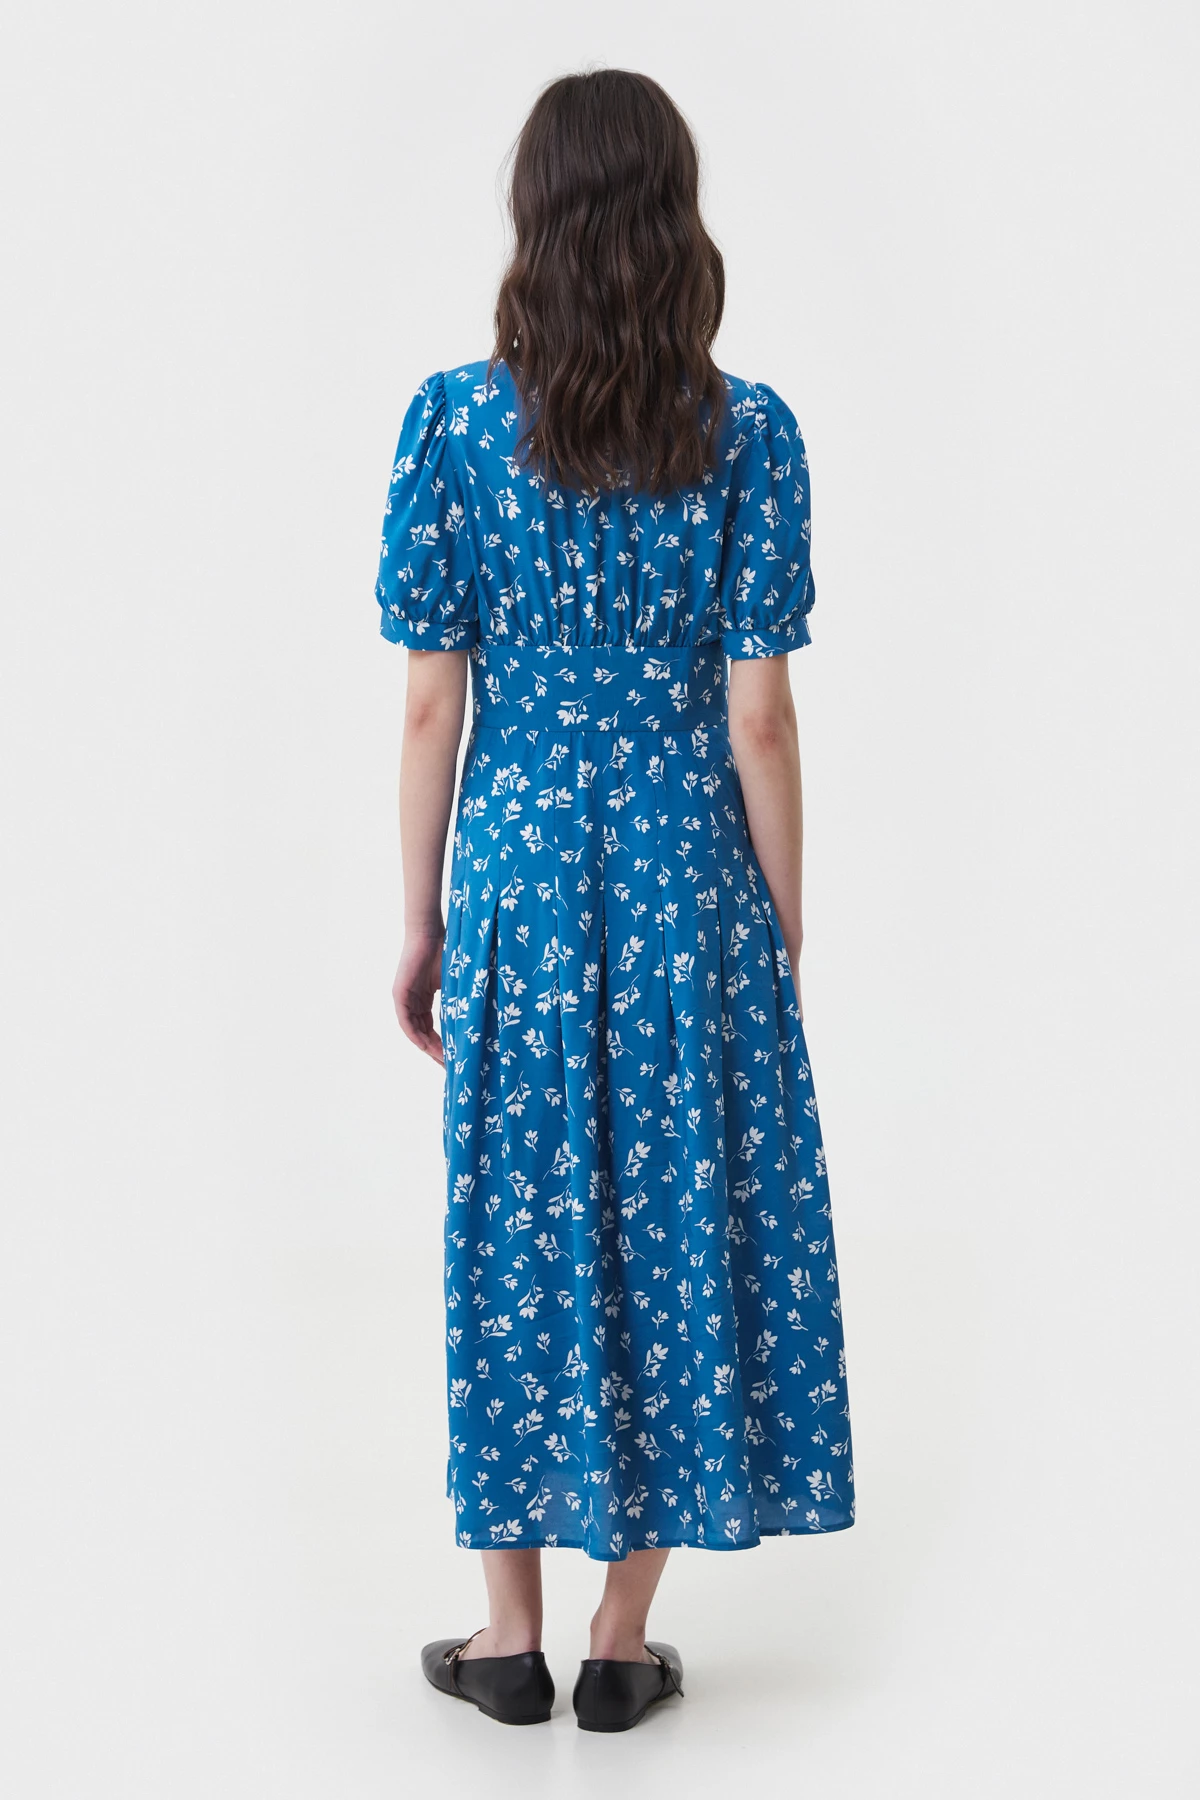 Blue viscose midi dress with buttons in floral print, photo 5